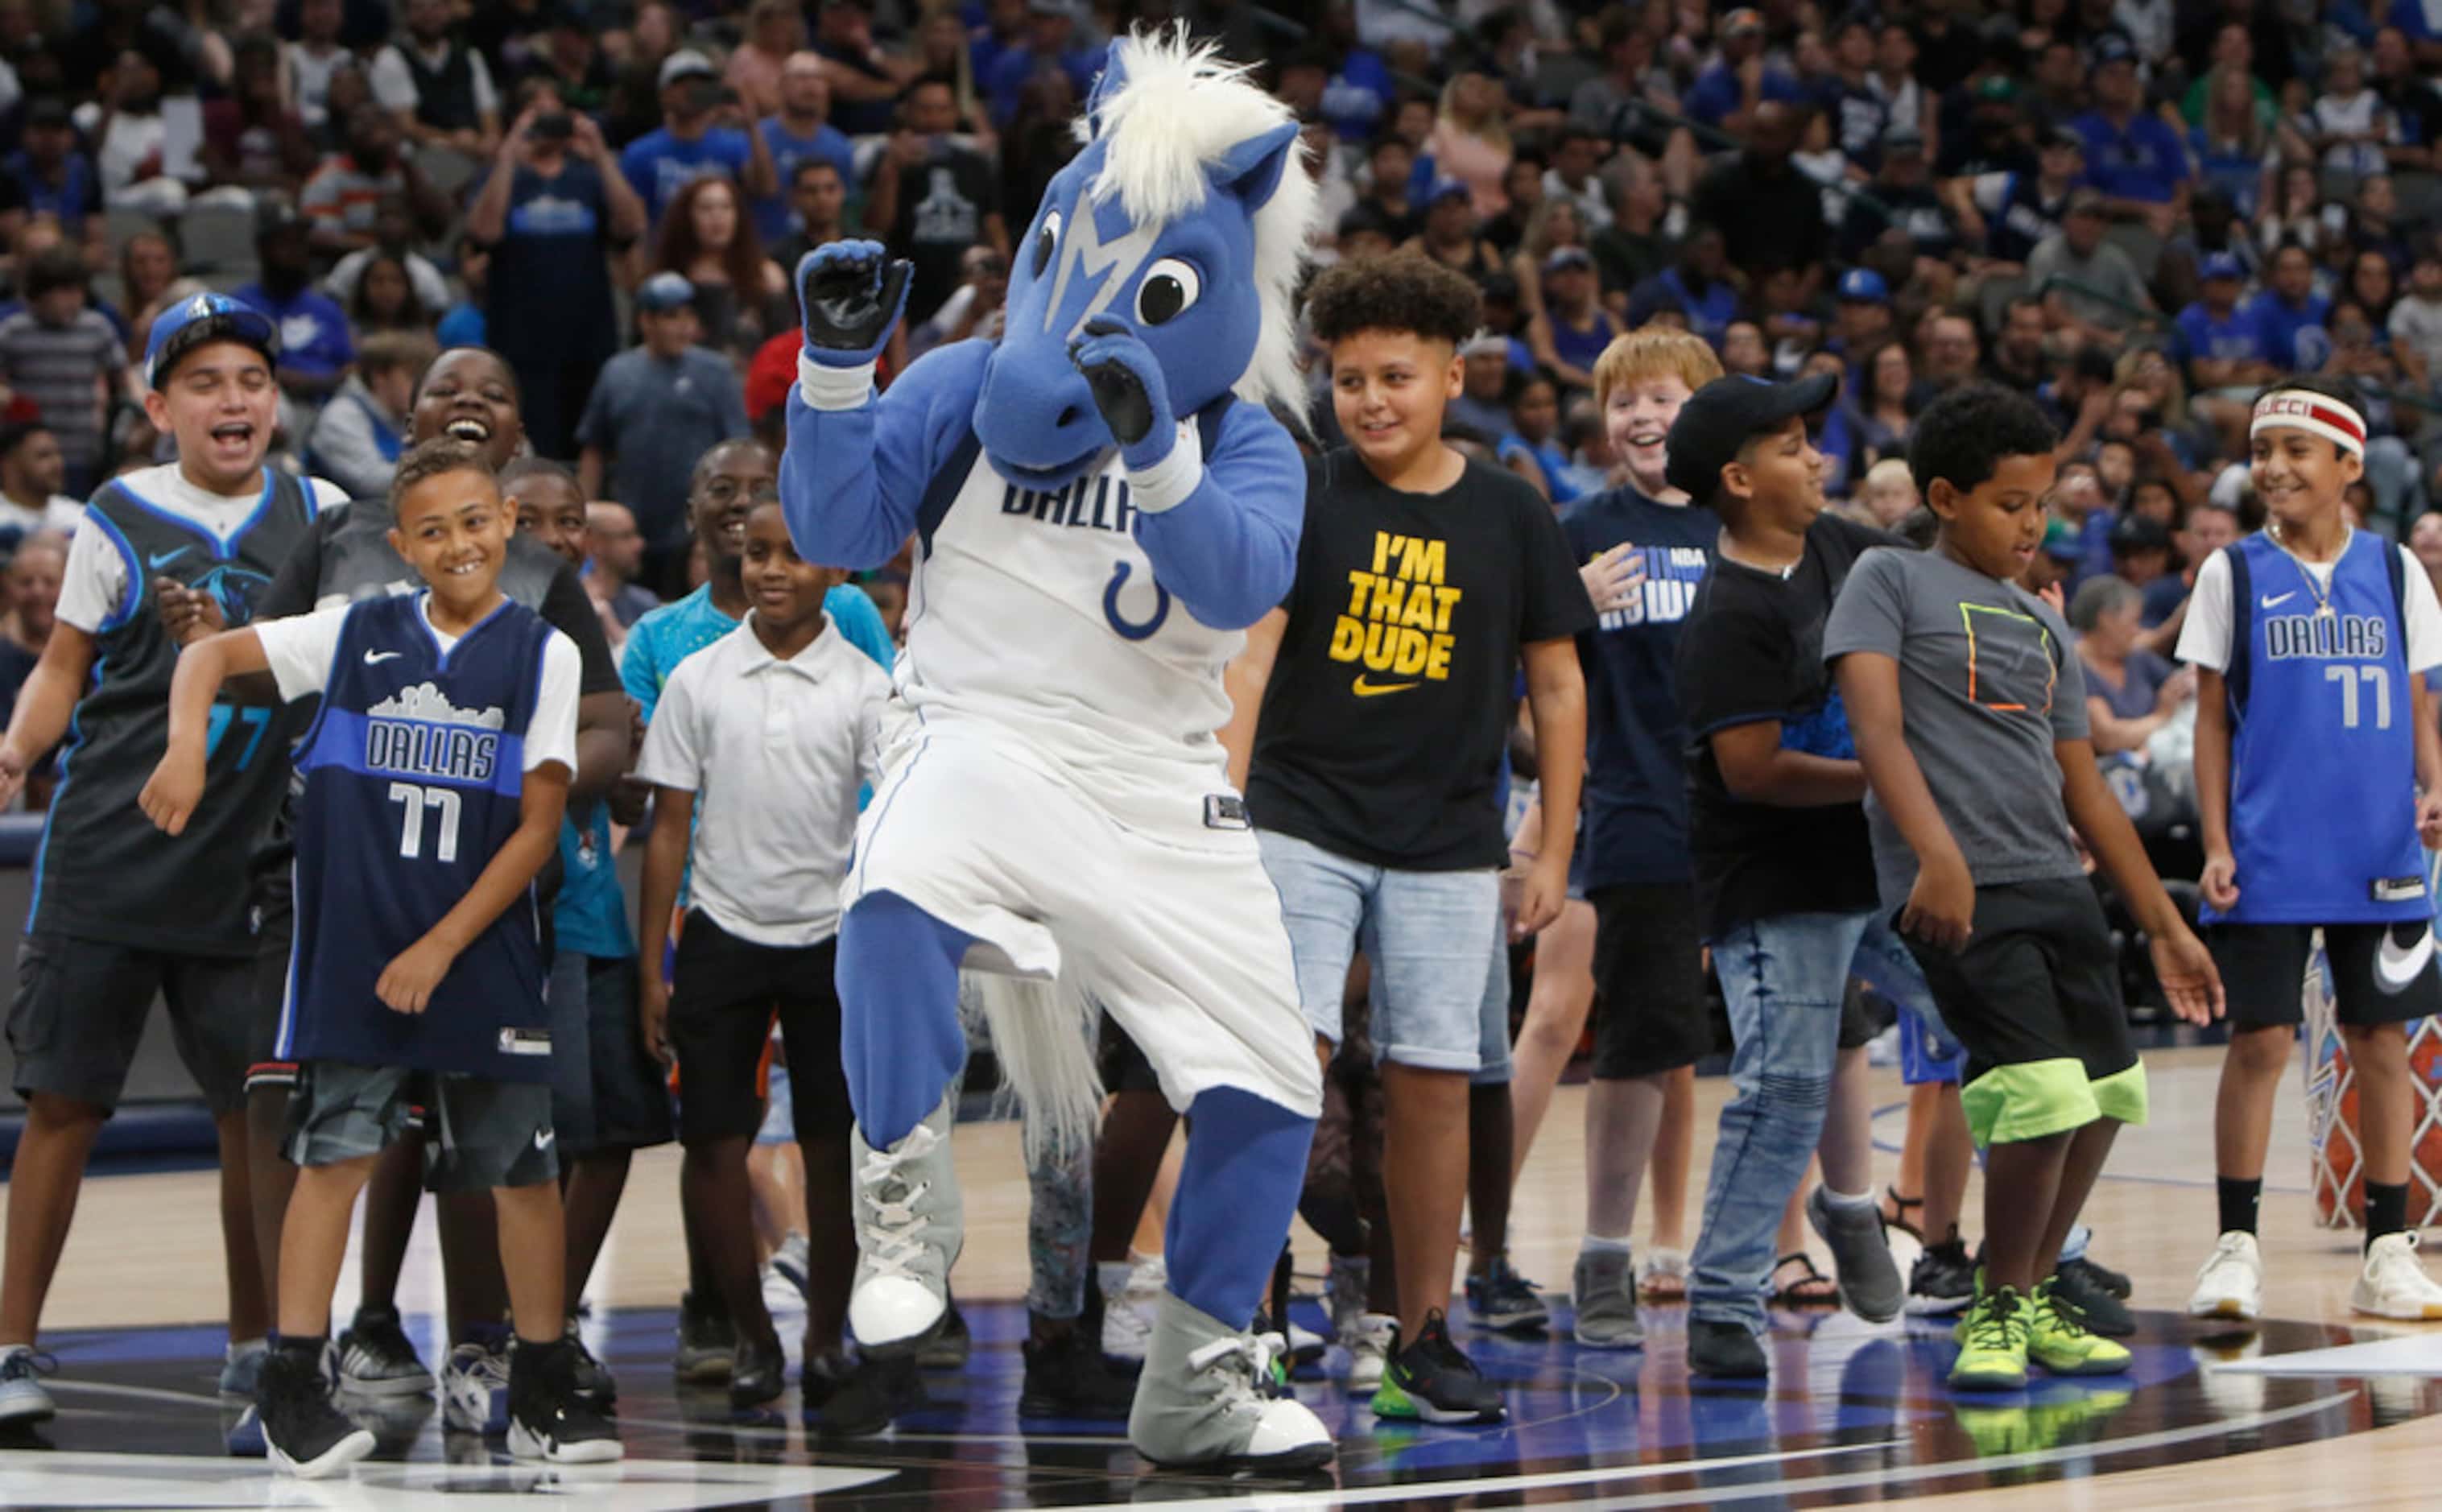 Led by Dallas Mavericks mascot "Champ", young Mavs fans practice their dance moves at mid...